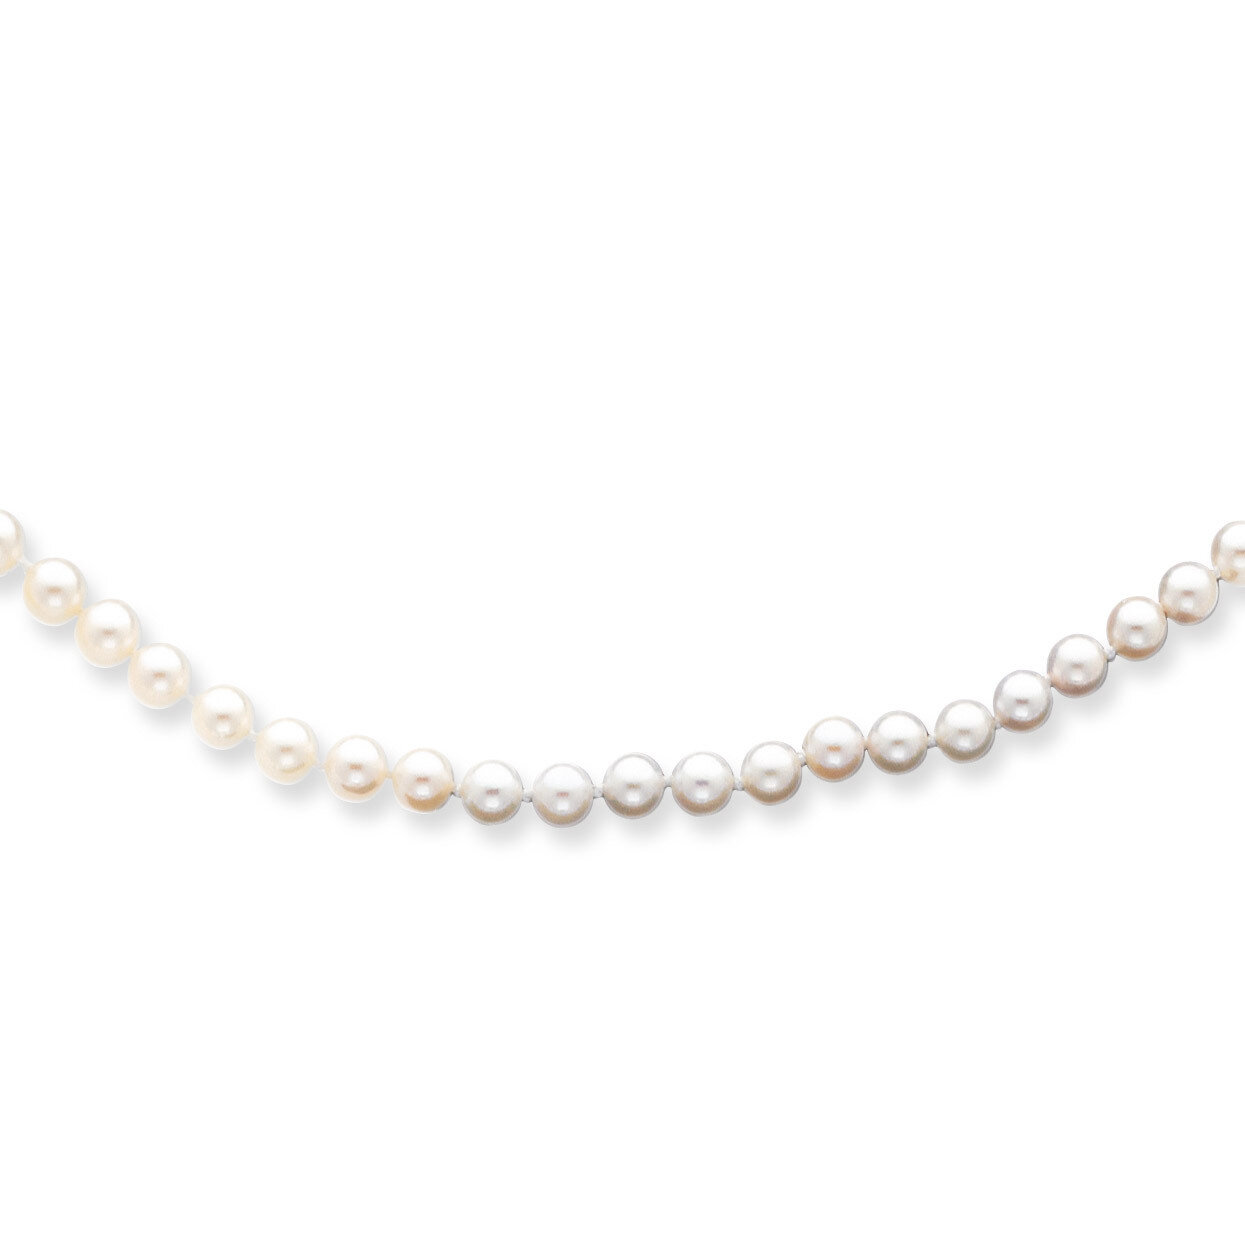 5-6mm Round White Saltwater Akoya Cultured Pearl Necklace 16 Inch 14k Gold PL50AA-16